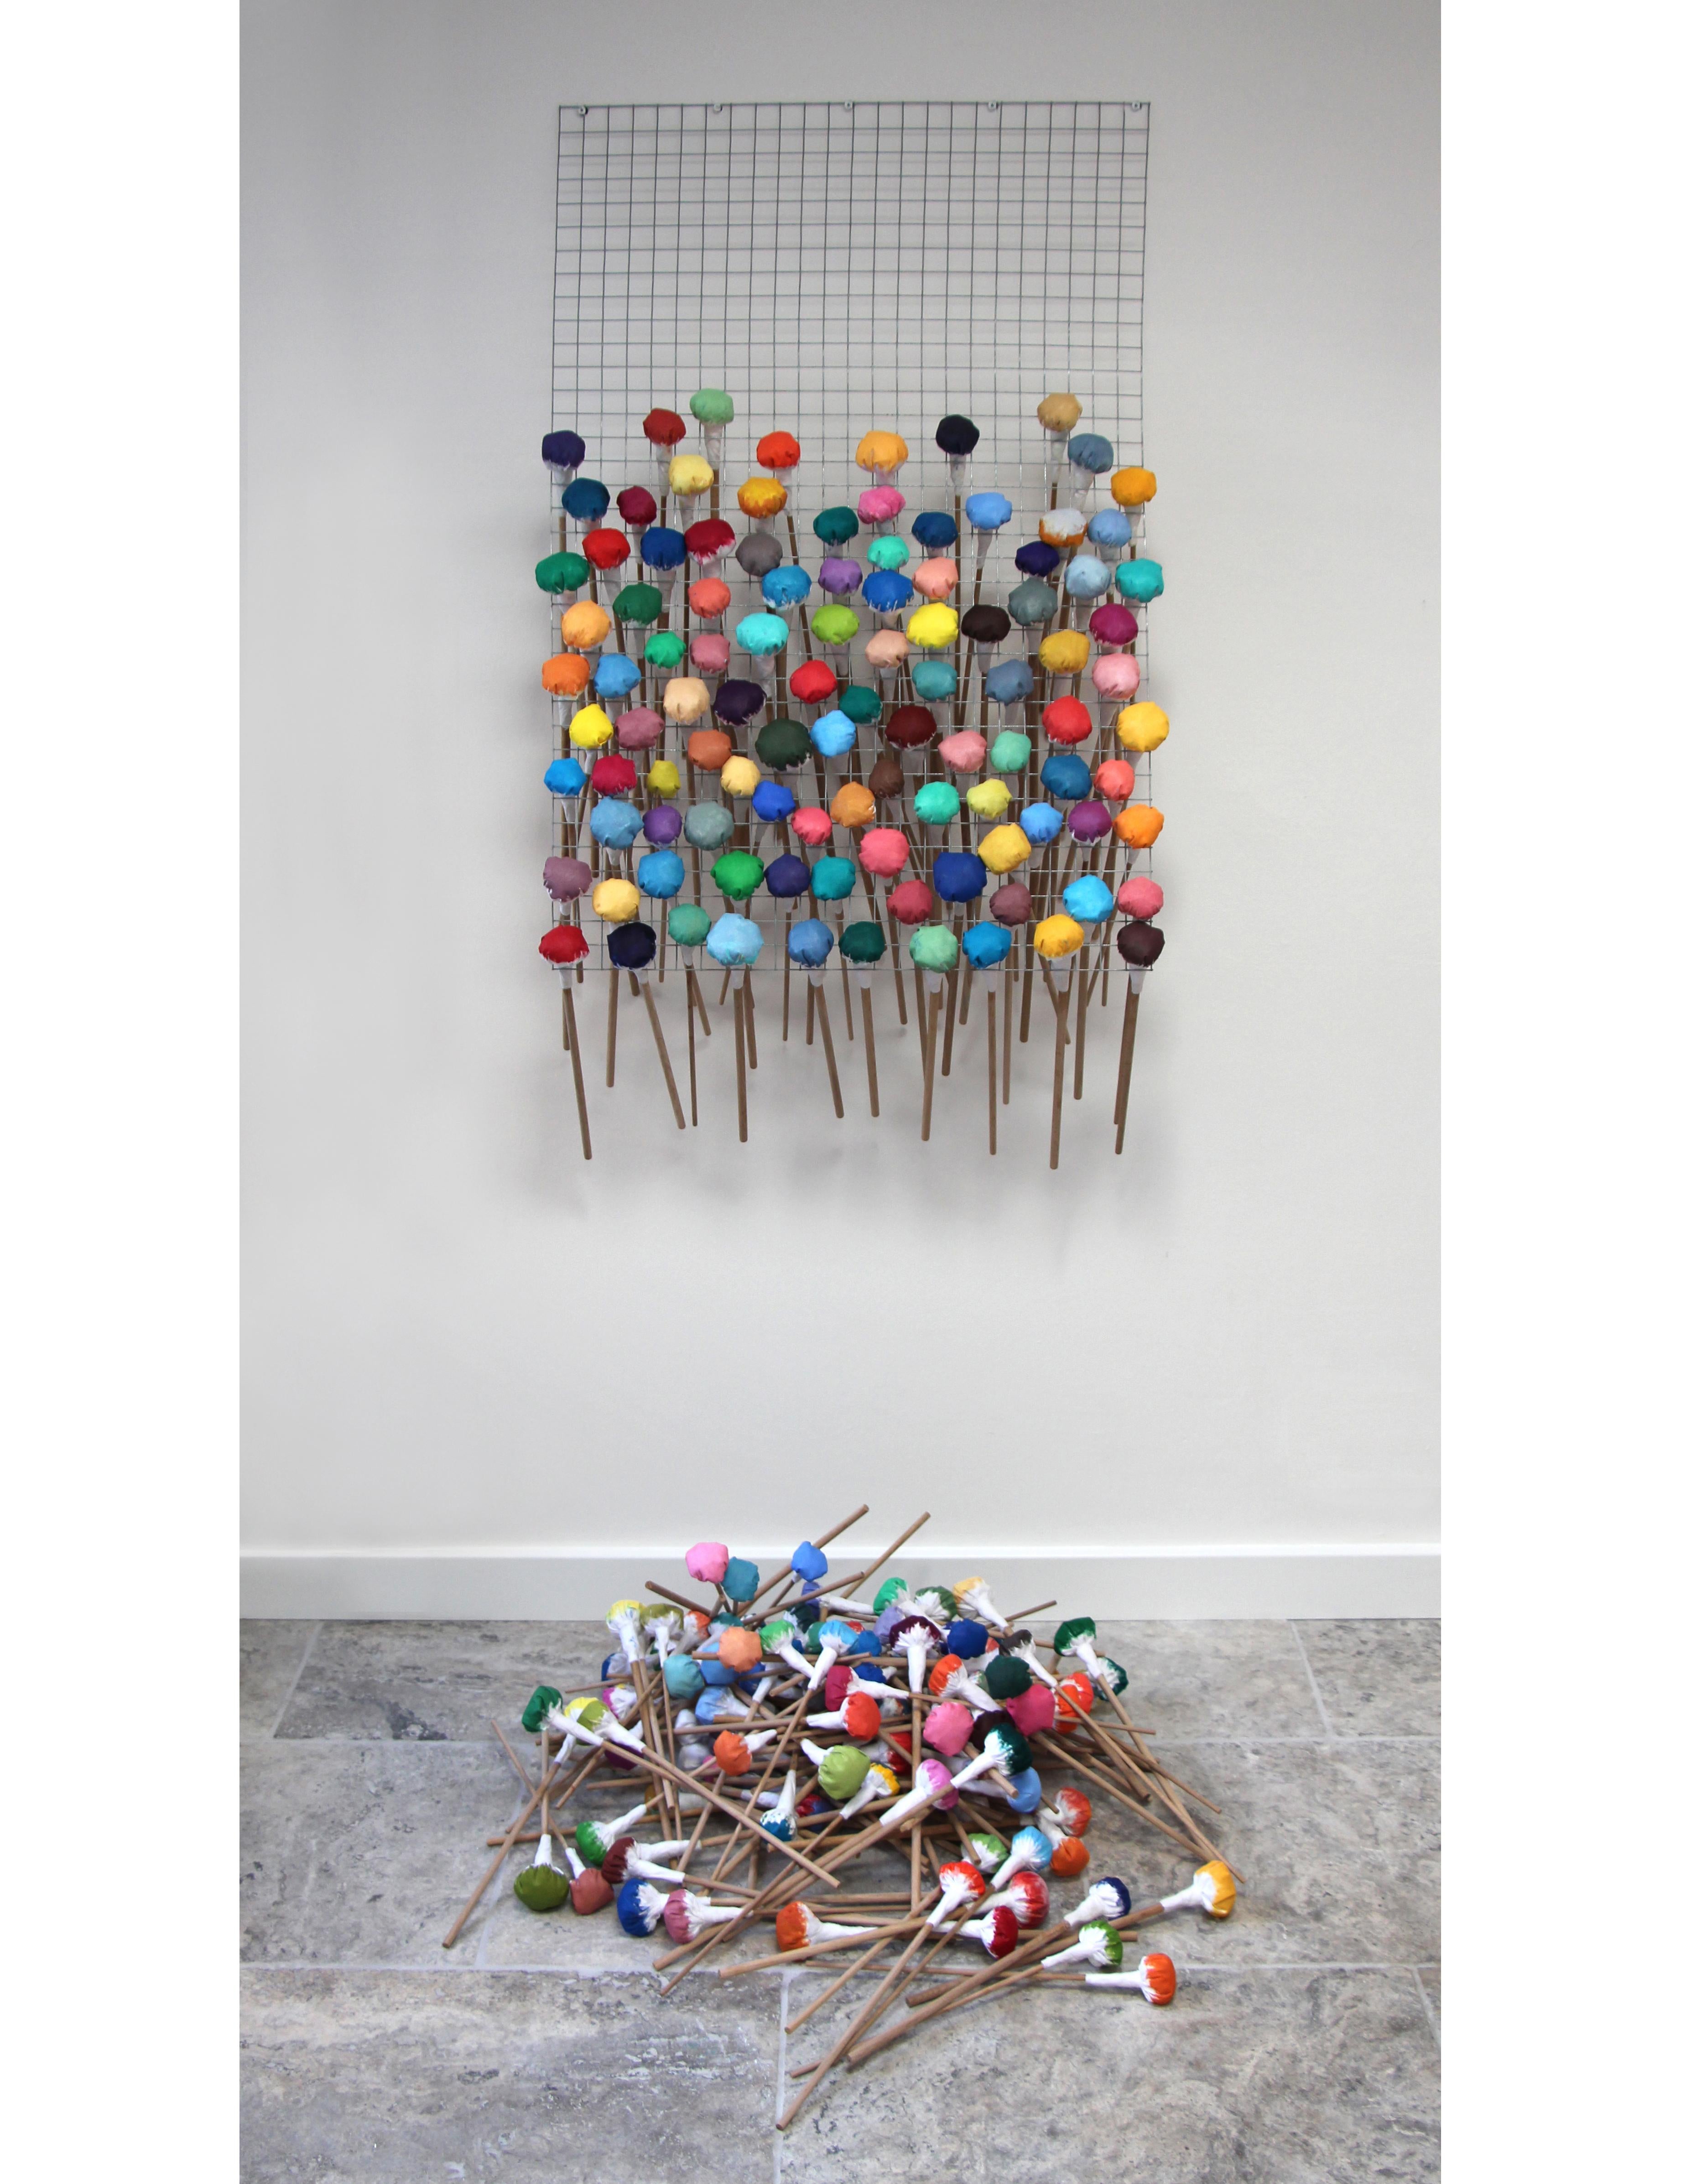 Interactive 3d textile and multimedia 'Pointillist' wall sculpture by Anna Ray is Presented by House On Mars Gallery.

